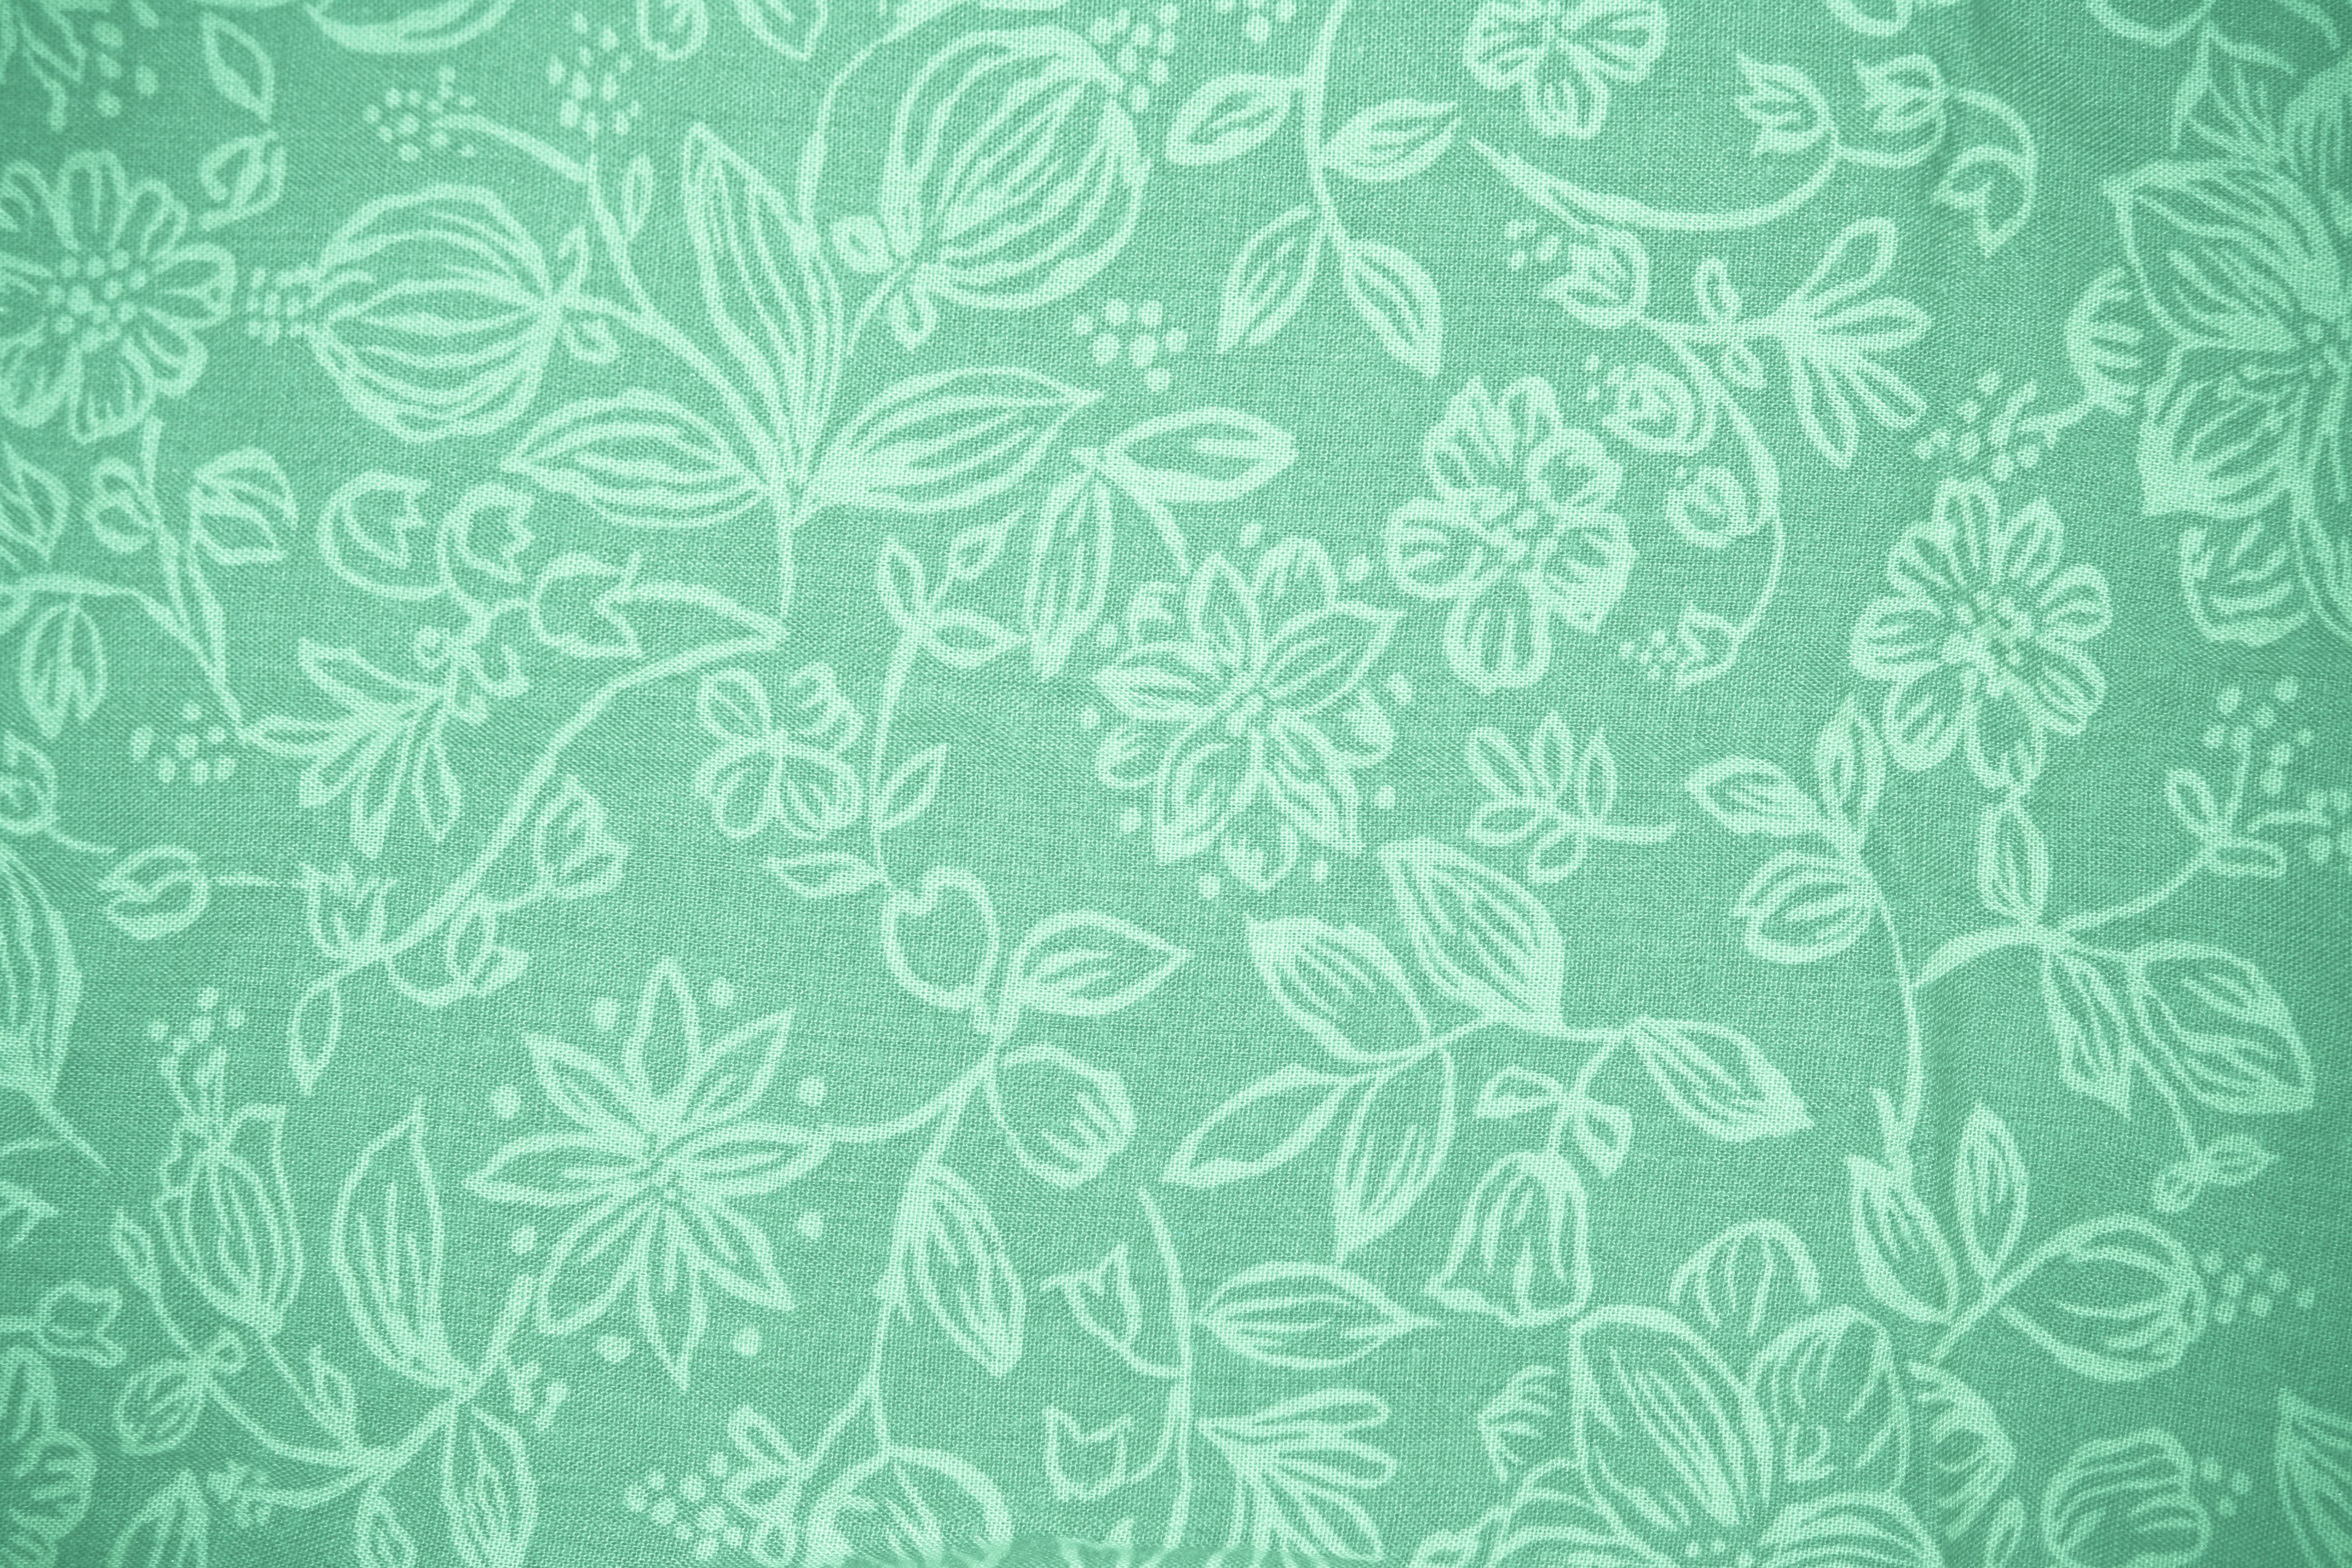 Mint Green Fabric With Floral Pattern Texture High